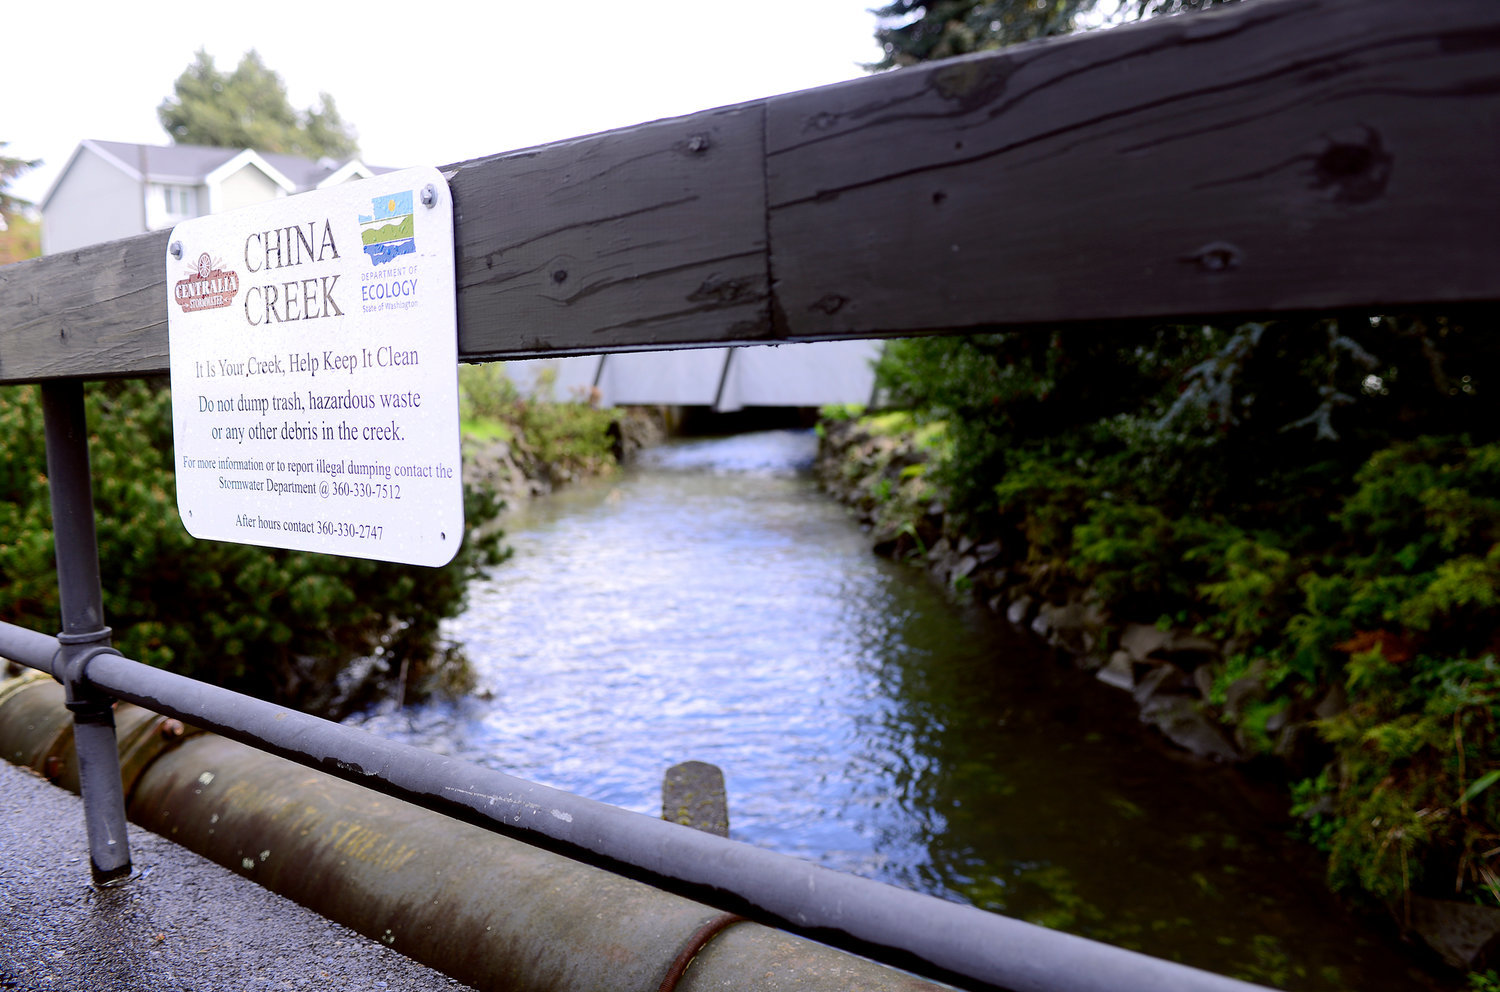 China Creek is pictured in this Chronicle file photo. A new gage has been installed on the creek, which runs through Centralia.